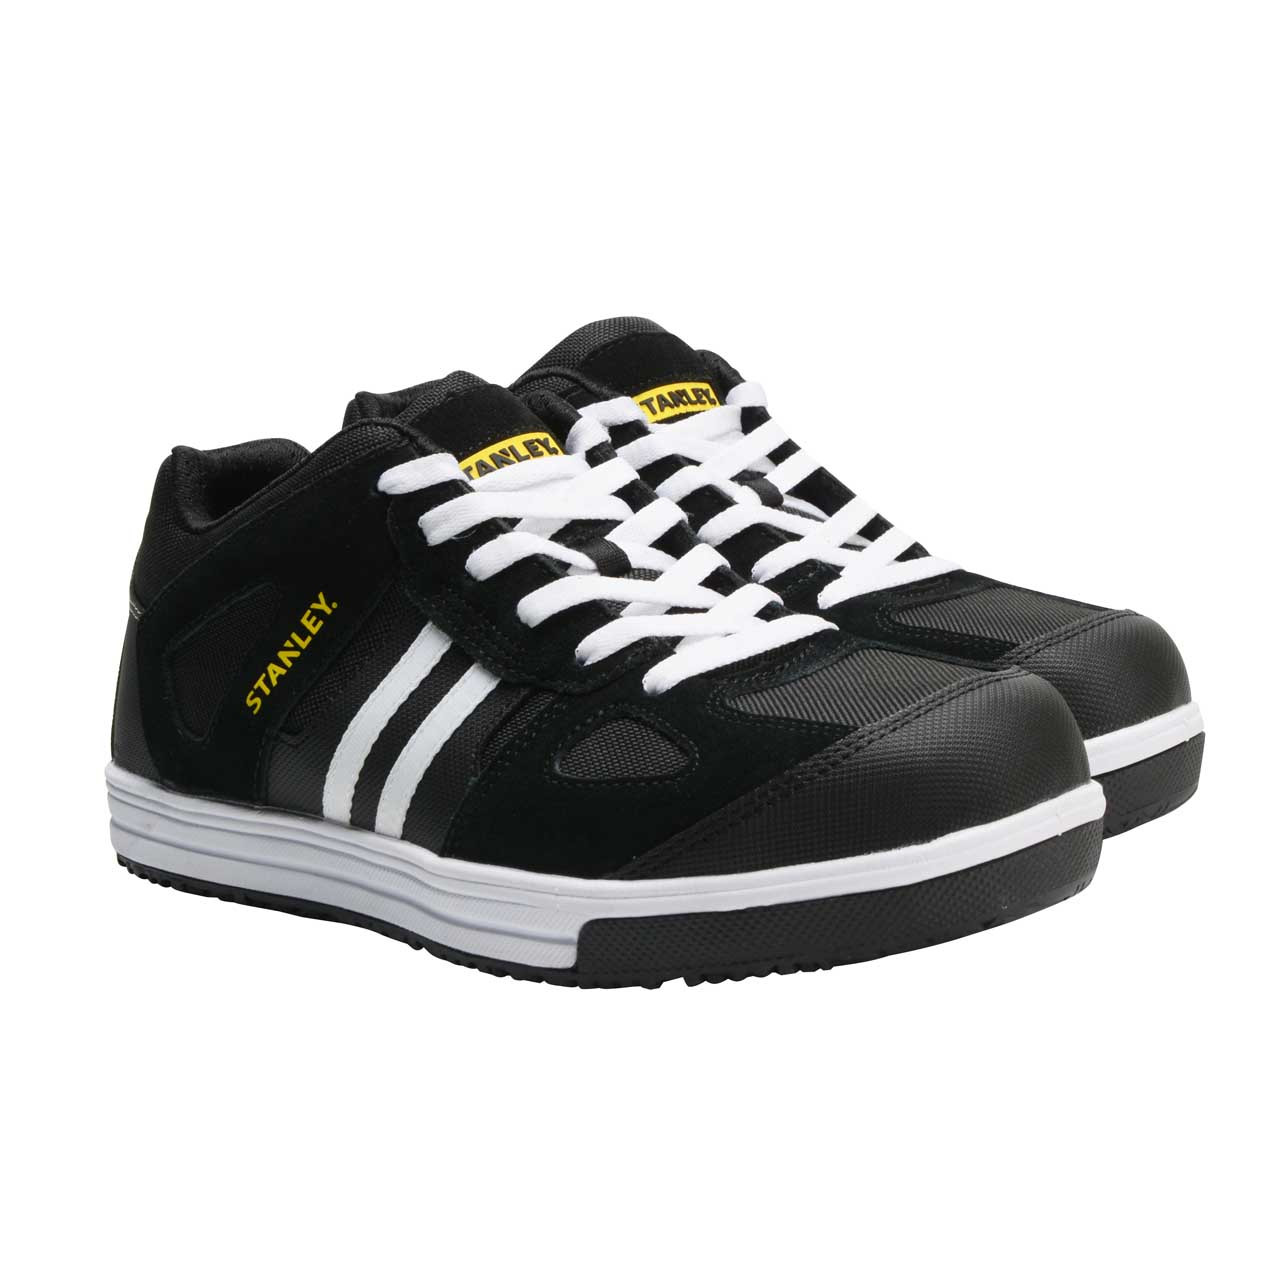 Photograph of Stanley Cody Safety Trainers Black/White Stripe UK 9 EUR 43